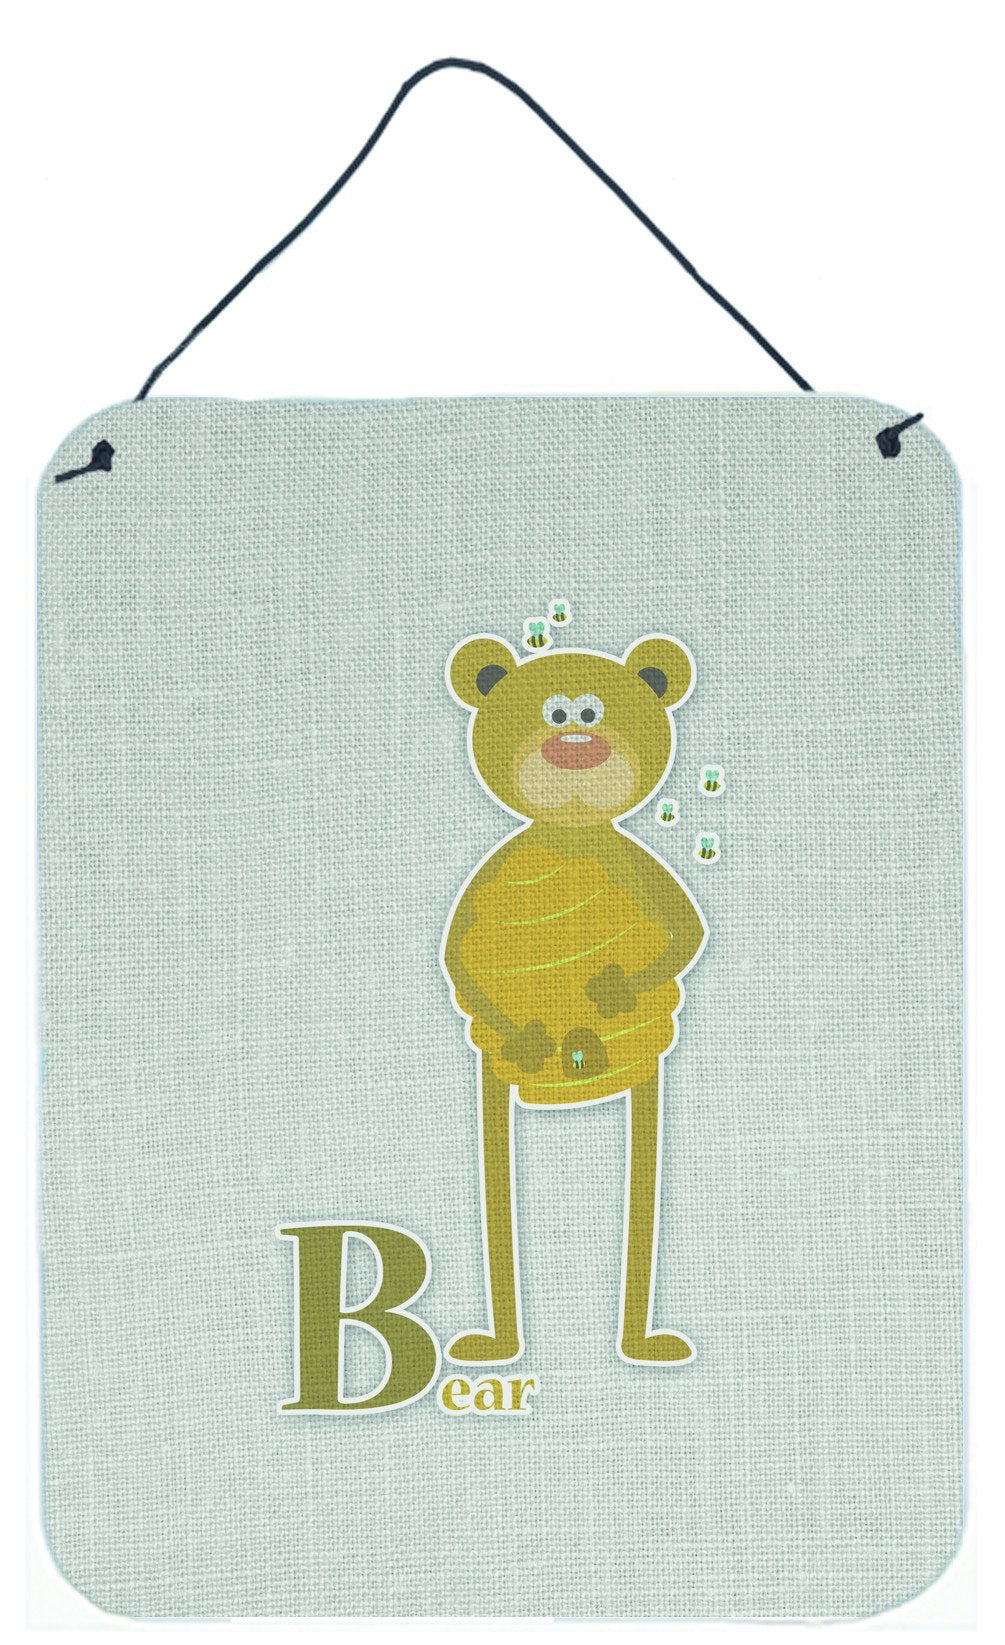 Alphabet B for Bear Wall or Door Hanging Prints BB5727DS1216 by Caroline's Treasures